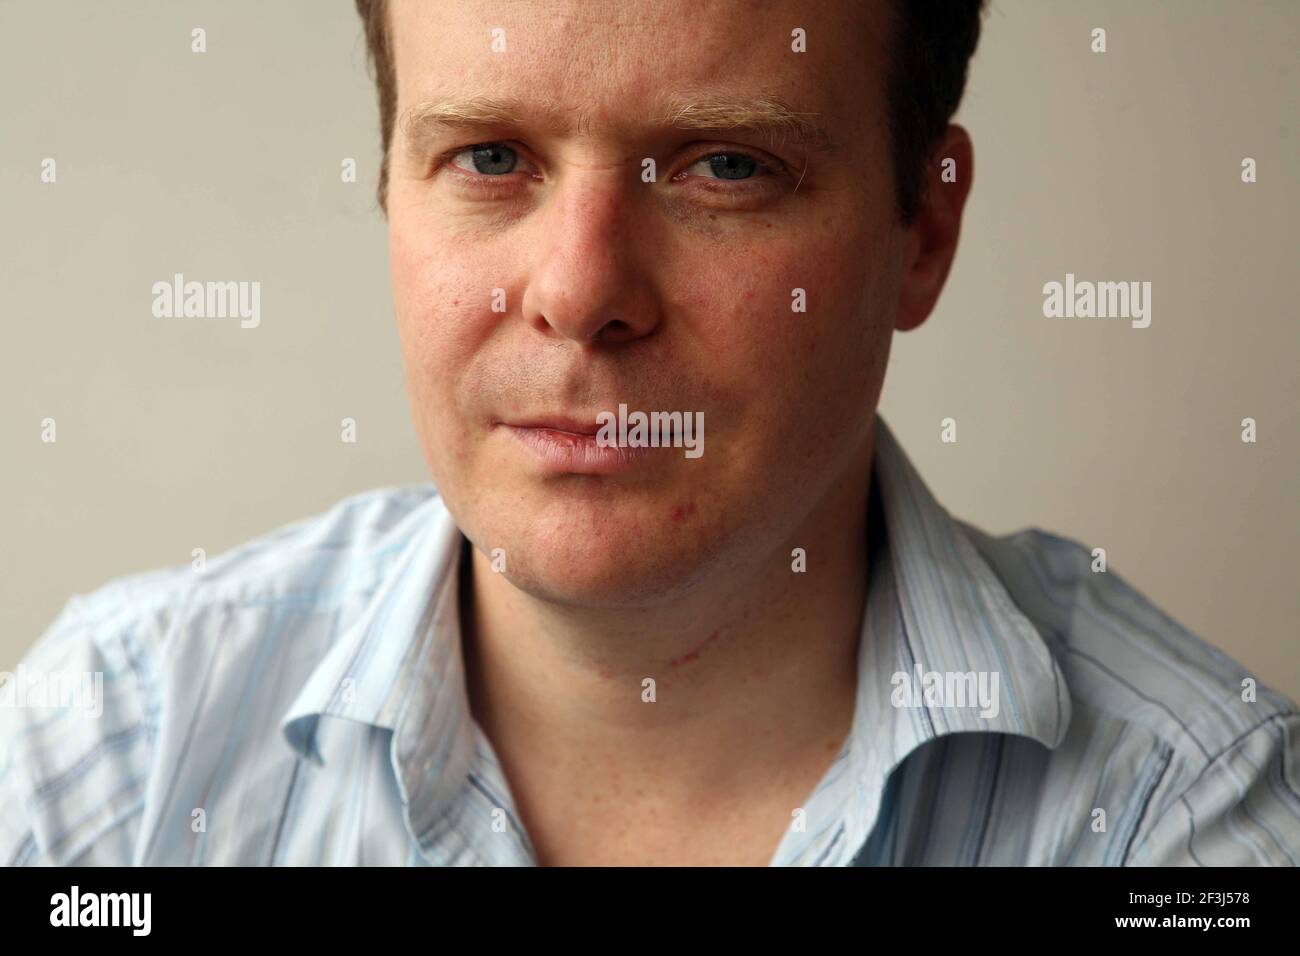 Tom Mccarthy High Resolution Stock Photography and Images - Alamy